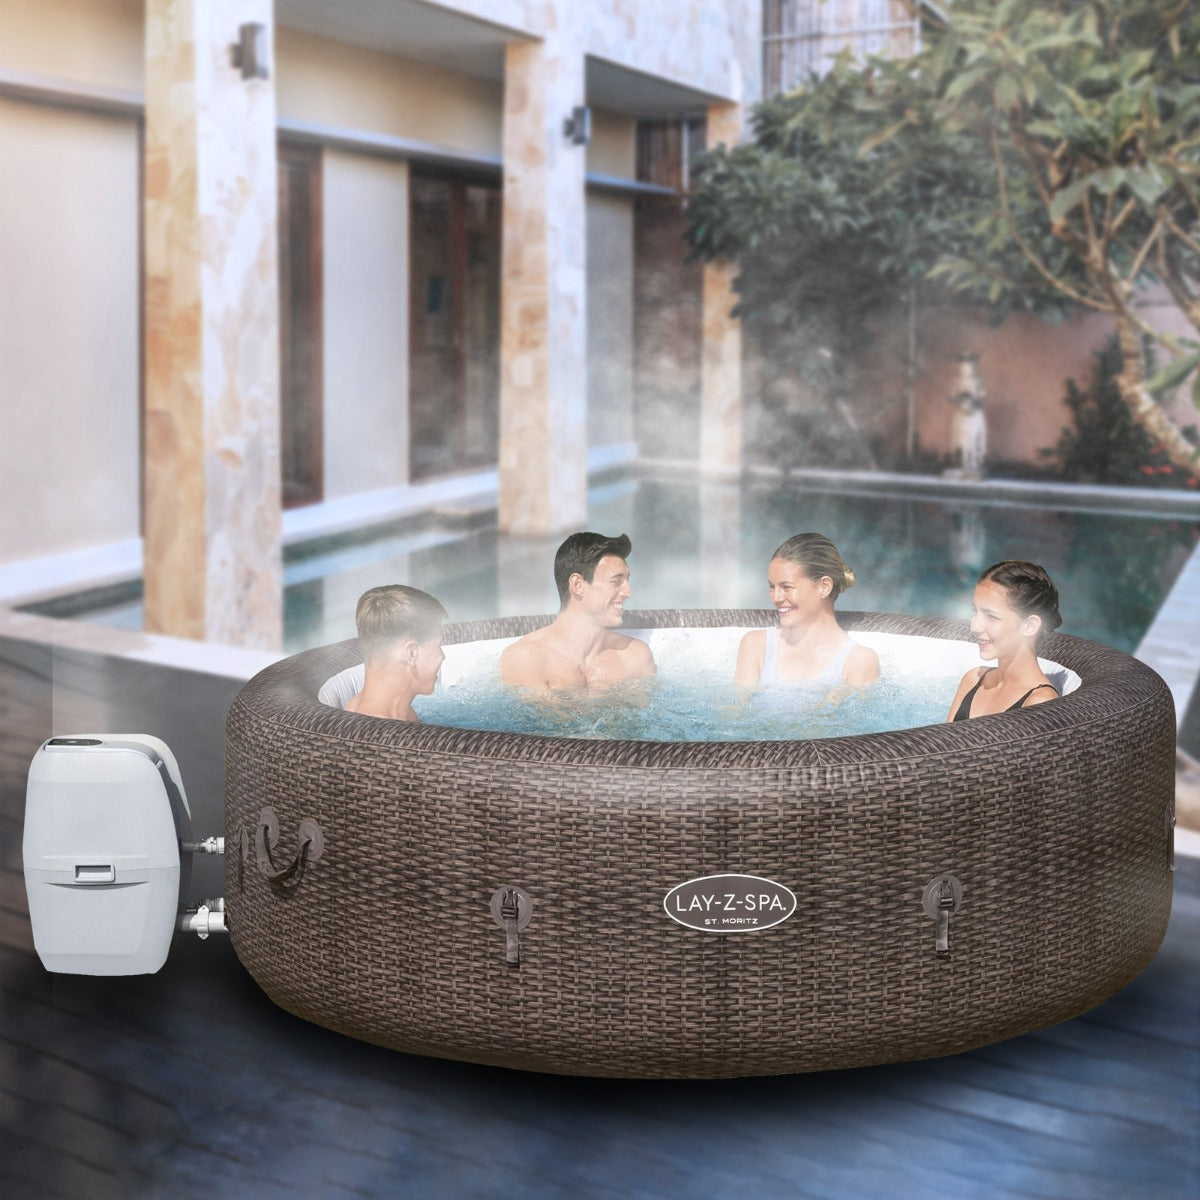 Gigantic! Bestway Lay Z Moritz St. Tub Heated Spa | Outbax Hot